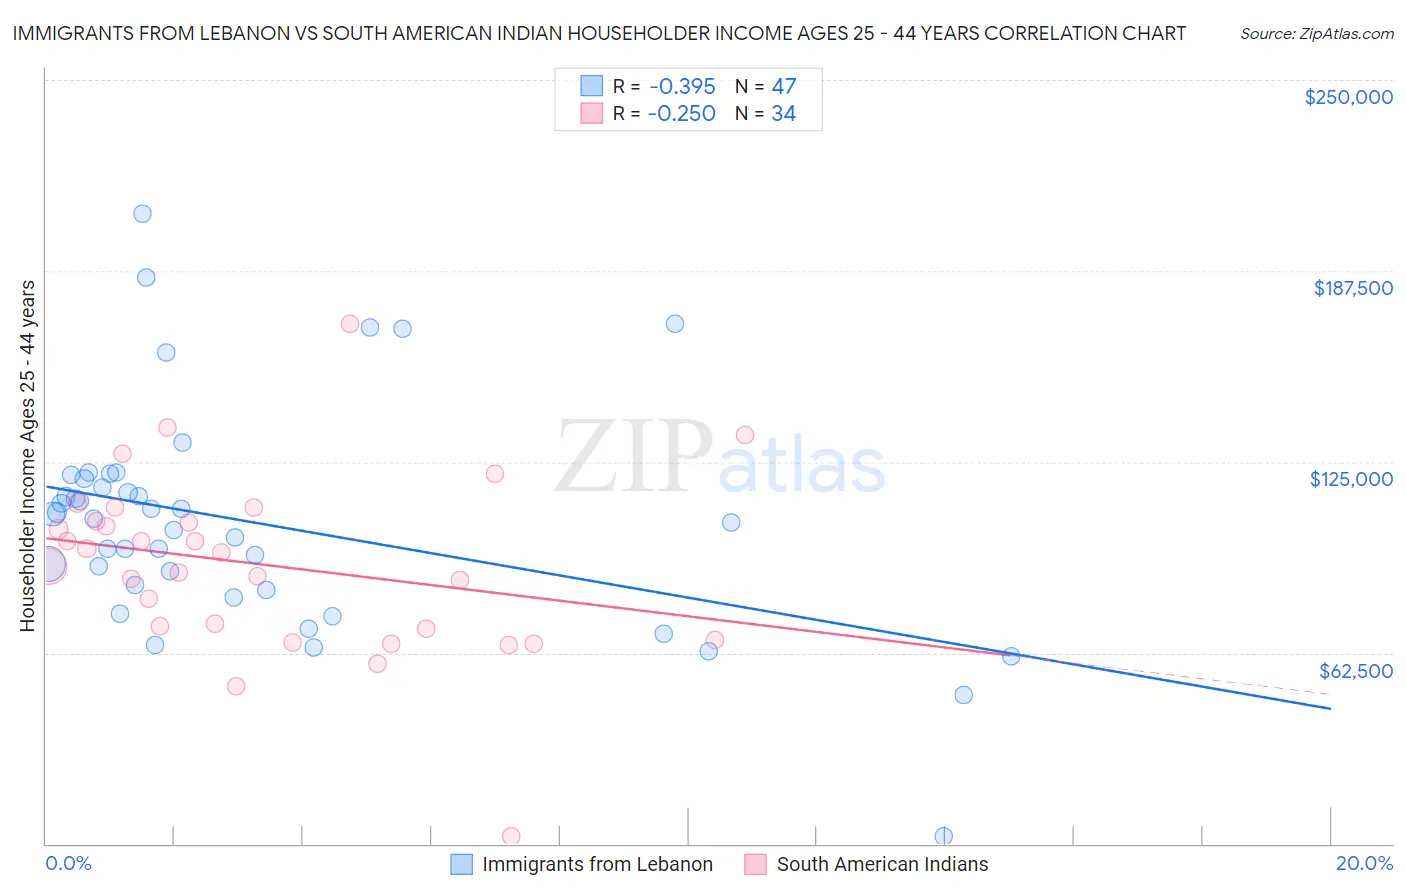 Immigrants from Lebanon vs South American Indian Householder Income Ages 25 - 44 years